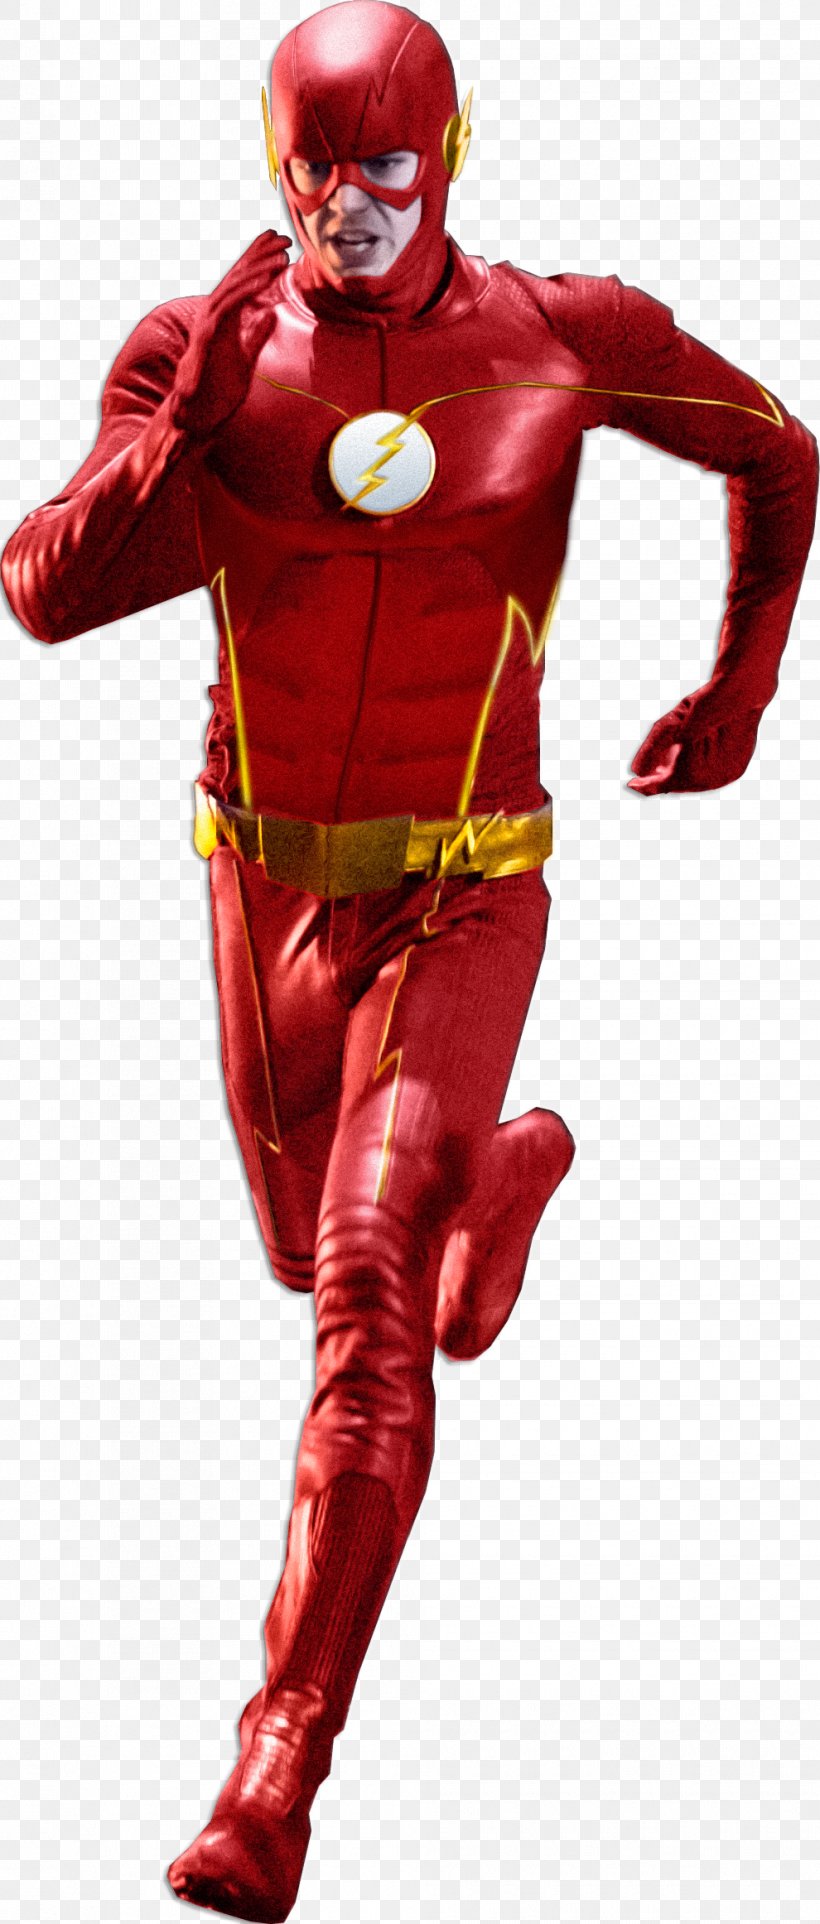 Wally West Rendering Clip Art, PNG, 990x2324px, Wally West, Costume, Fictional Character, Flash, Rendering Download Free